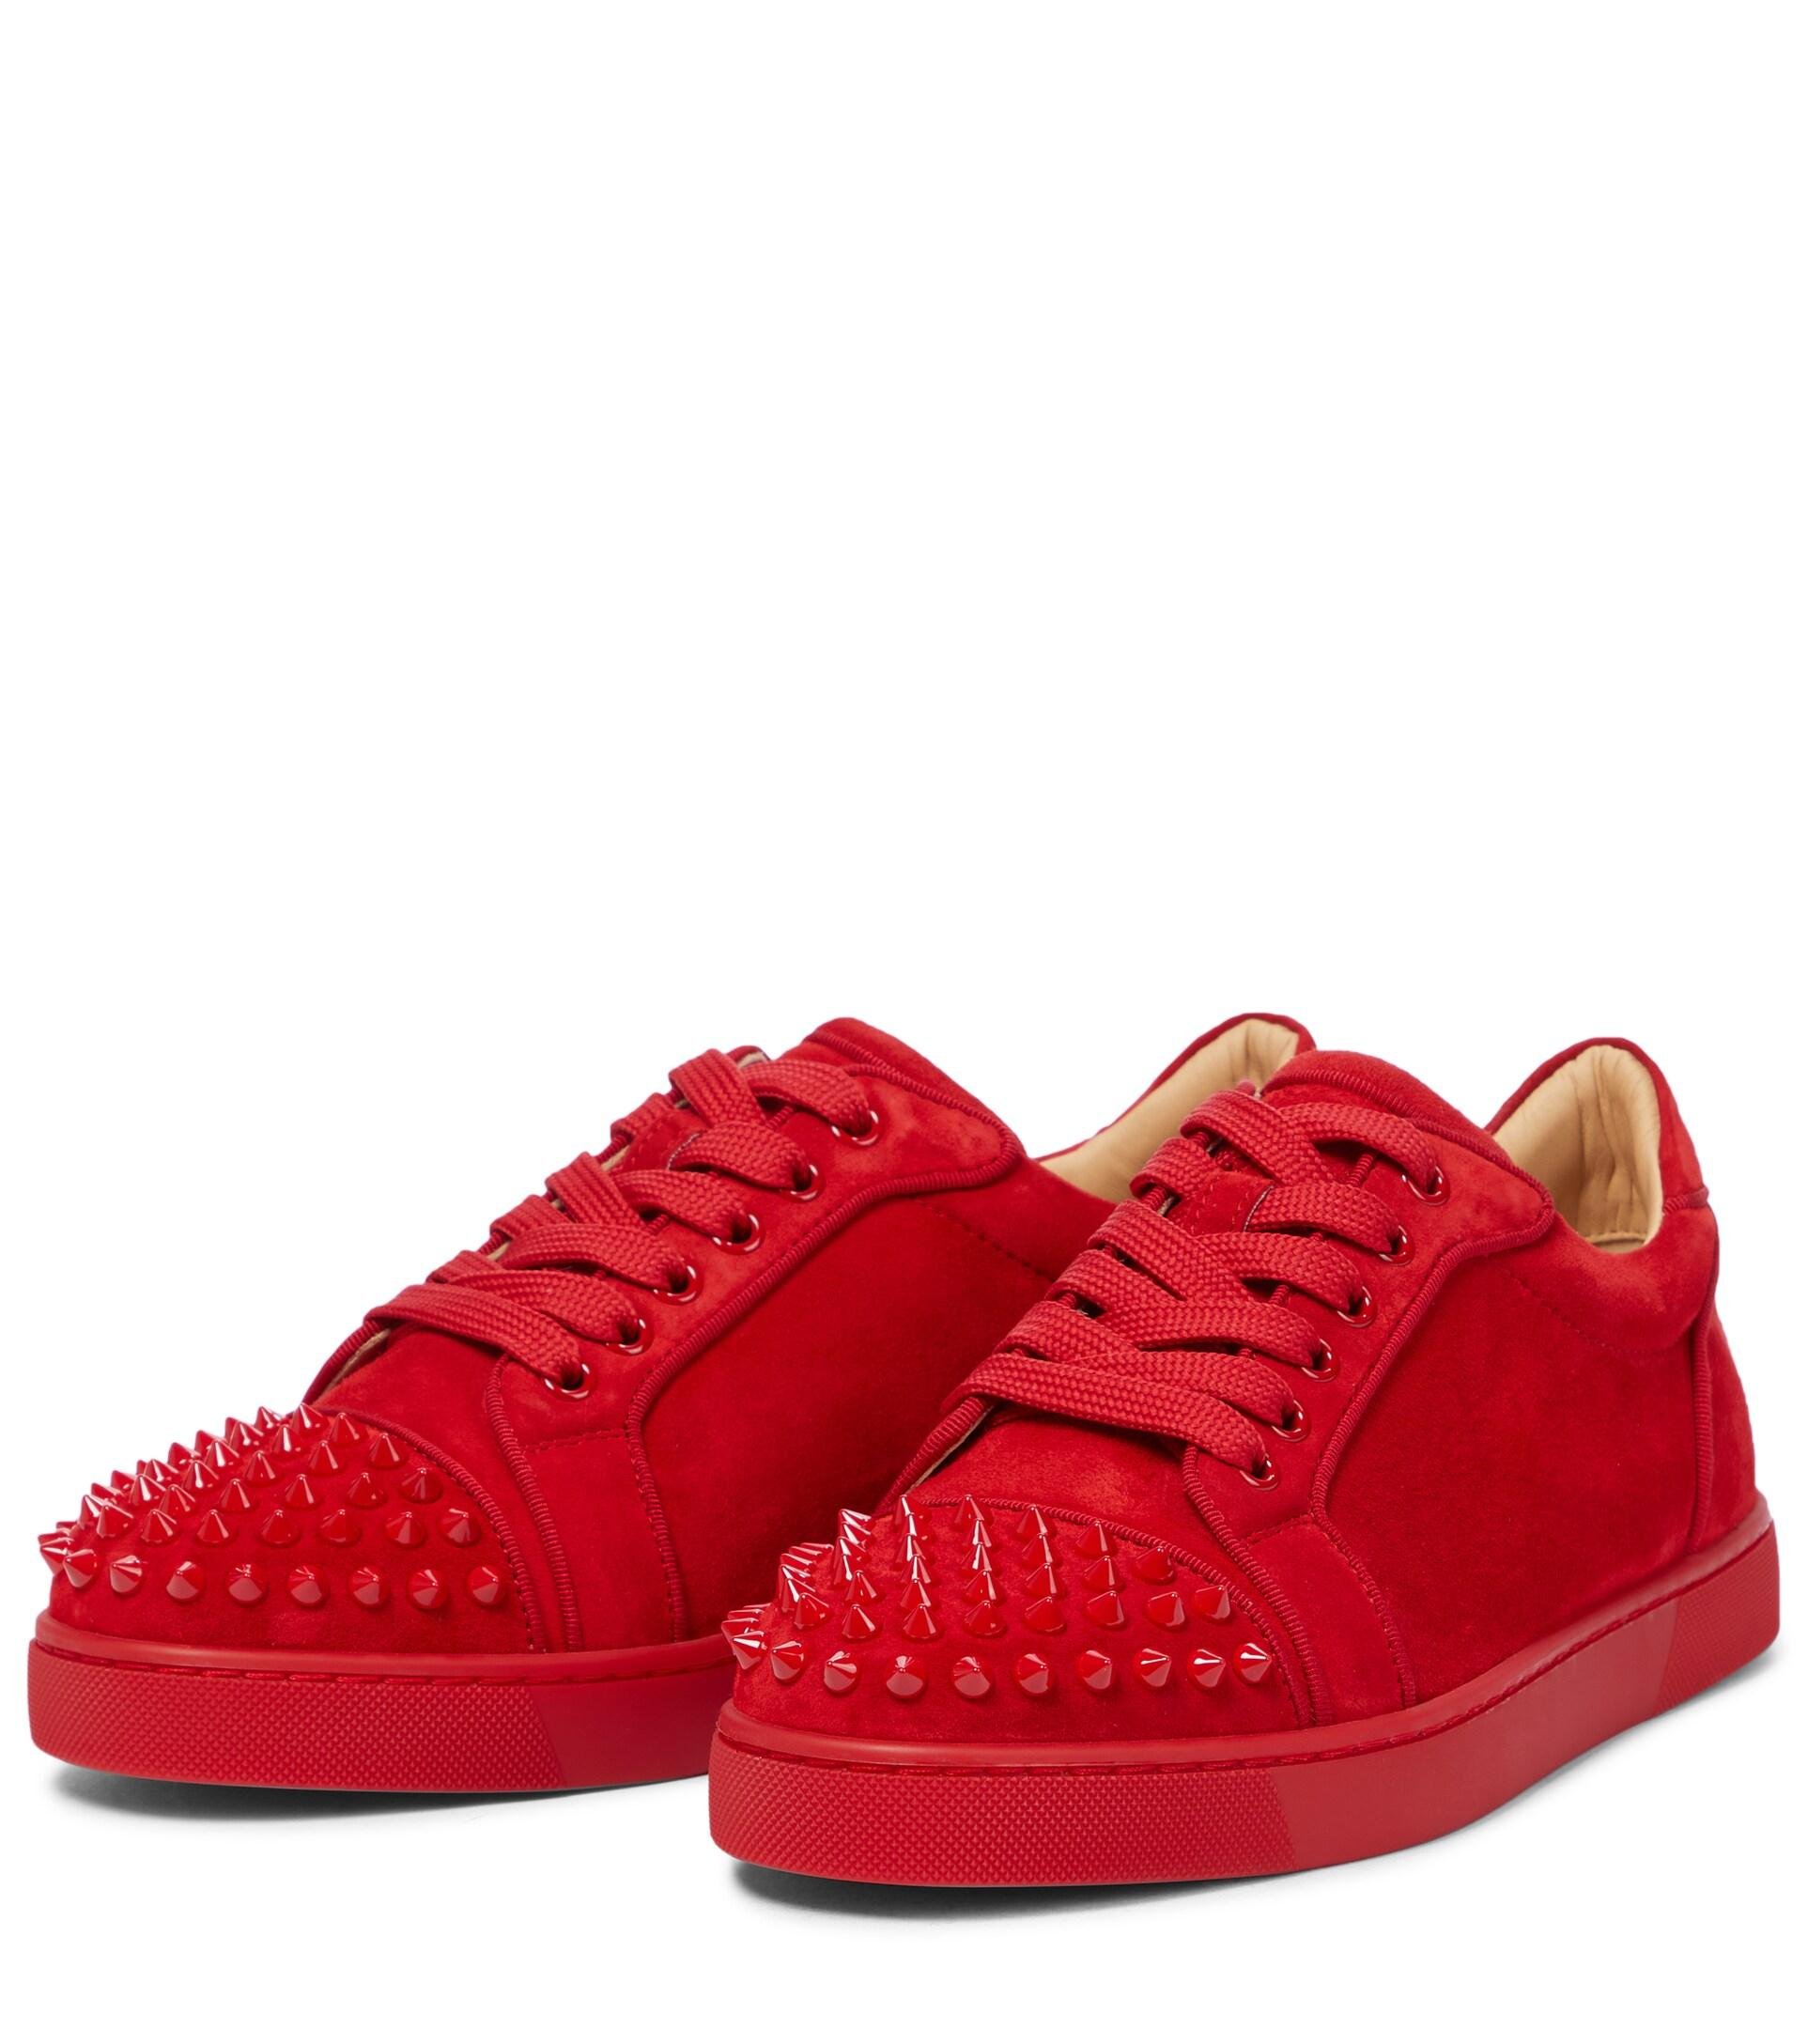 Christian Louboutin Men's Orlato Sneakers Spiked Suede Red EU 39 / US Mens  6.5 | eBay